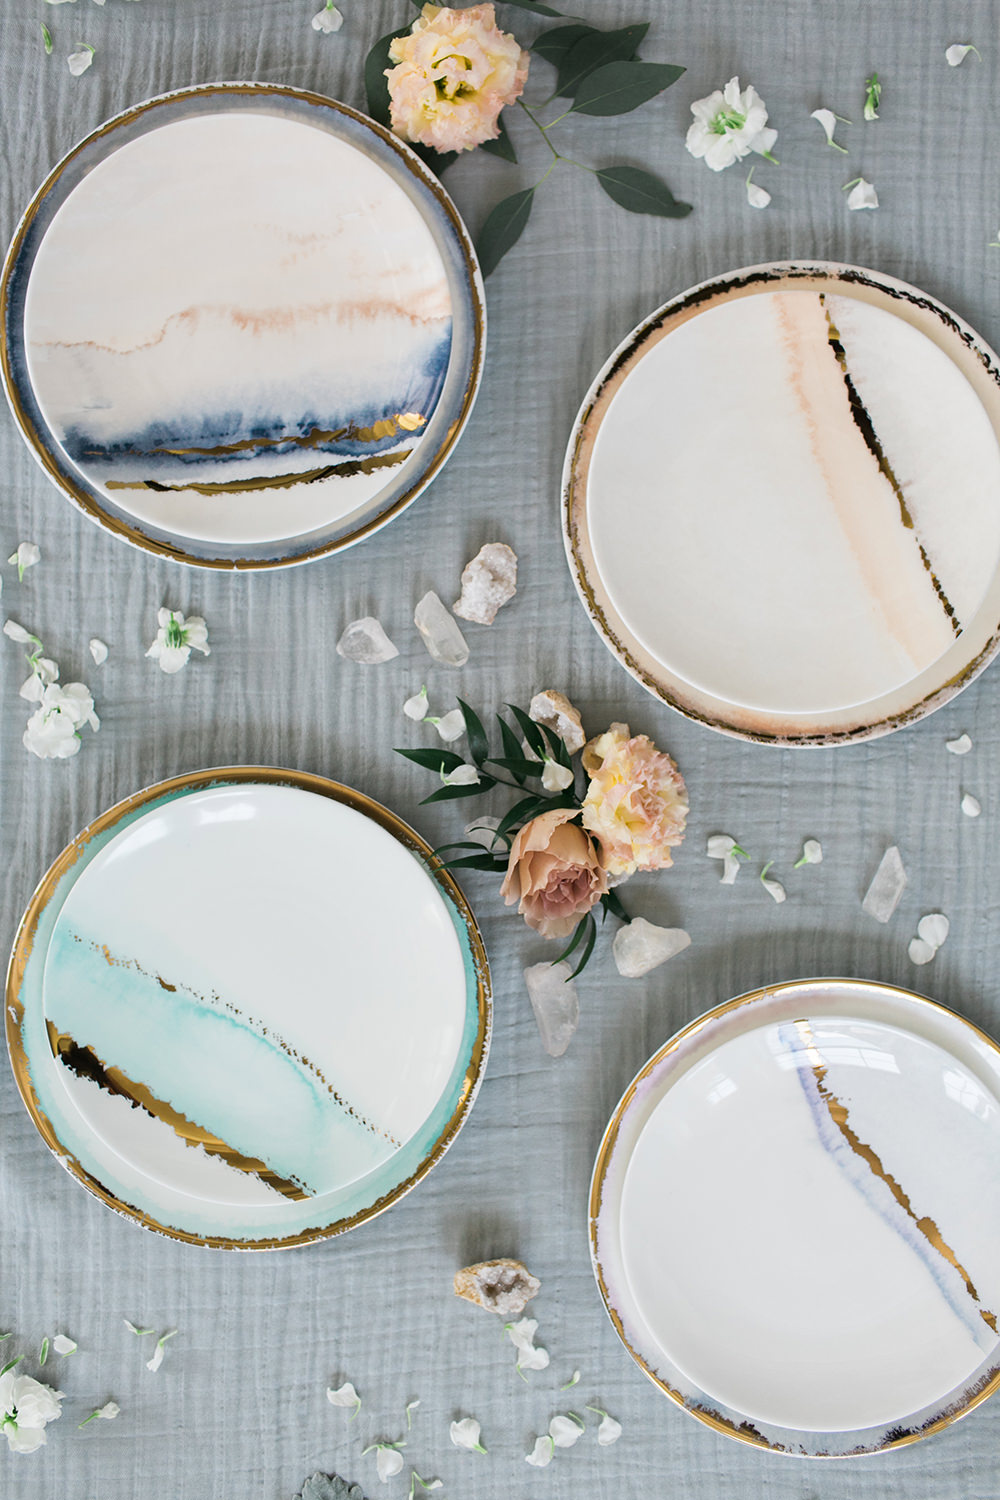 colorful Lenox plates - https://ruffledblog.com/entertain-in-style-with-bloomingdales